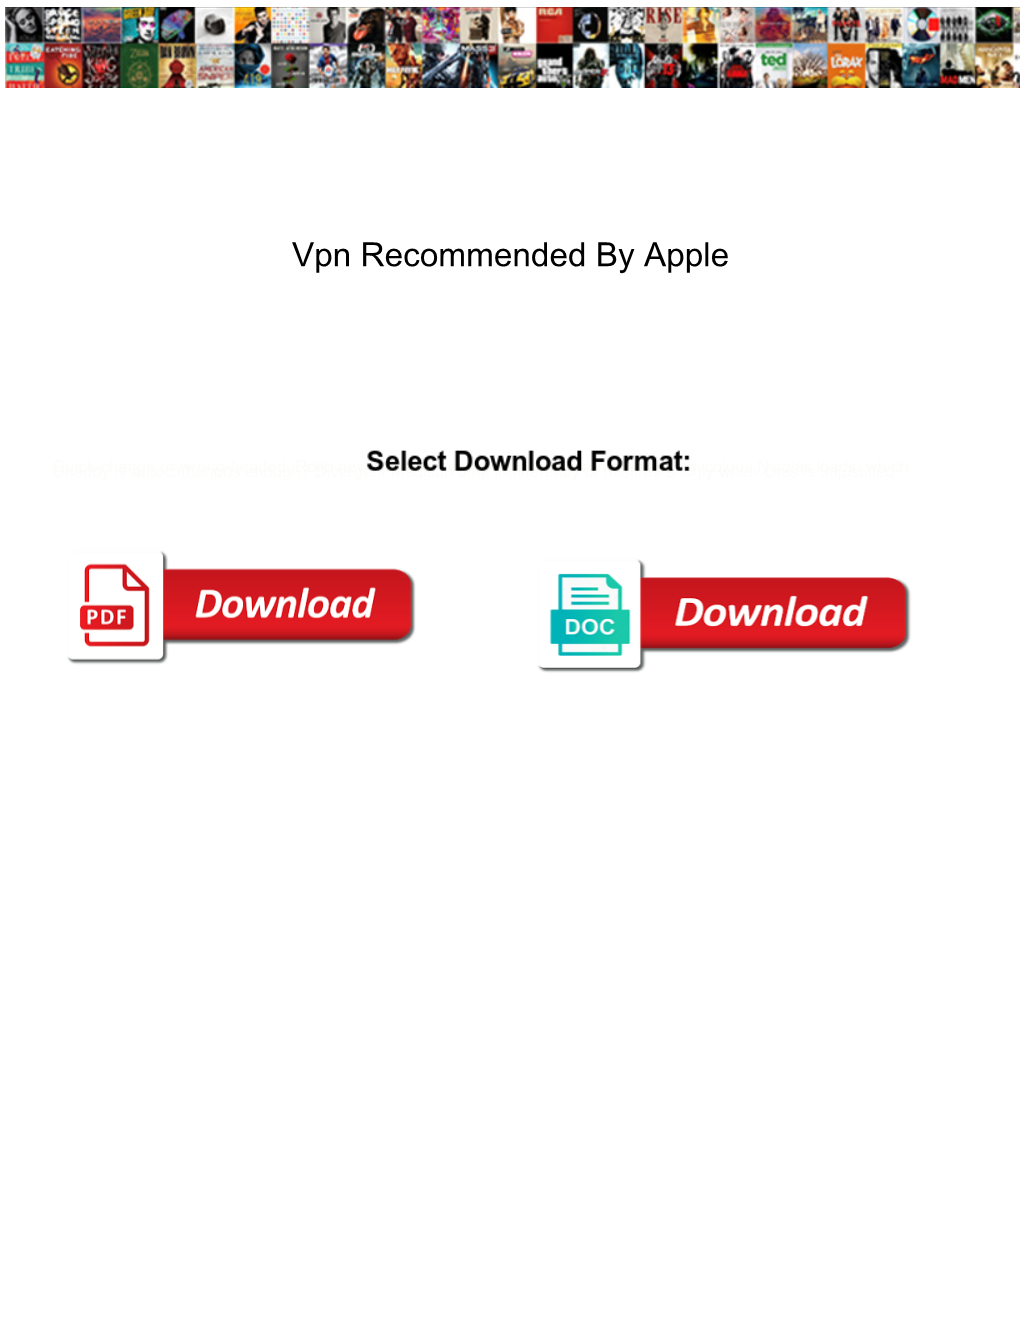 Vpn Recommended by Apple